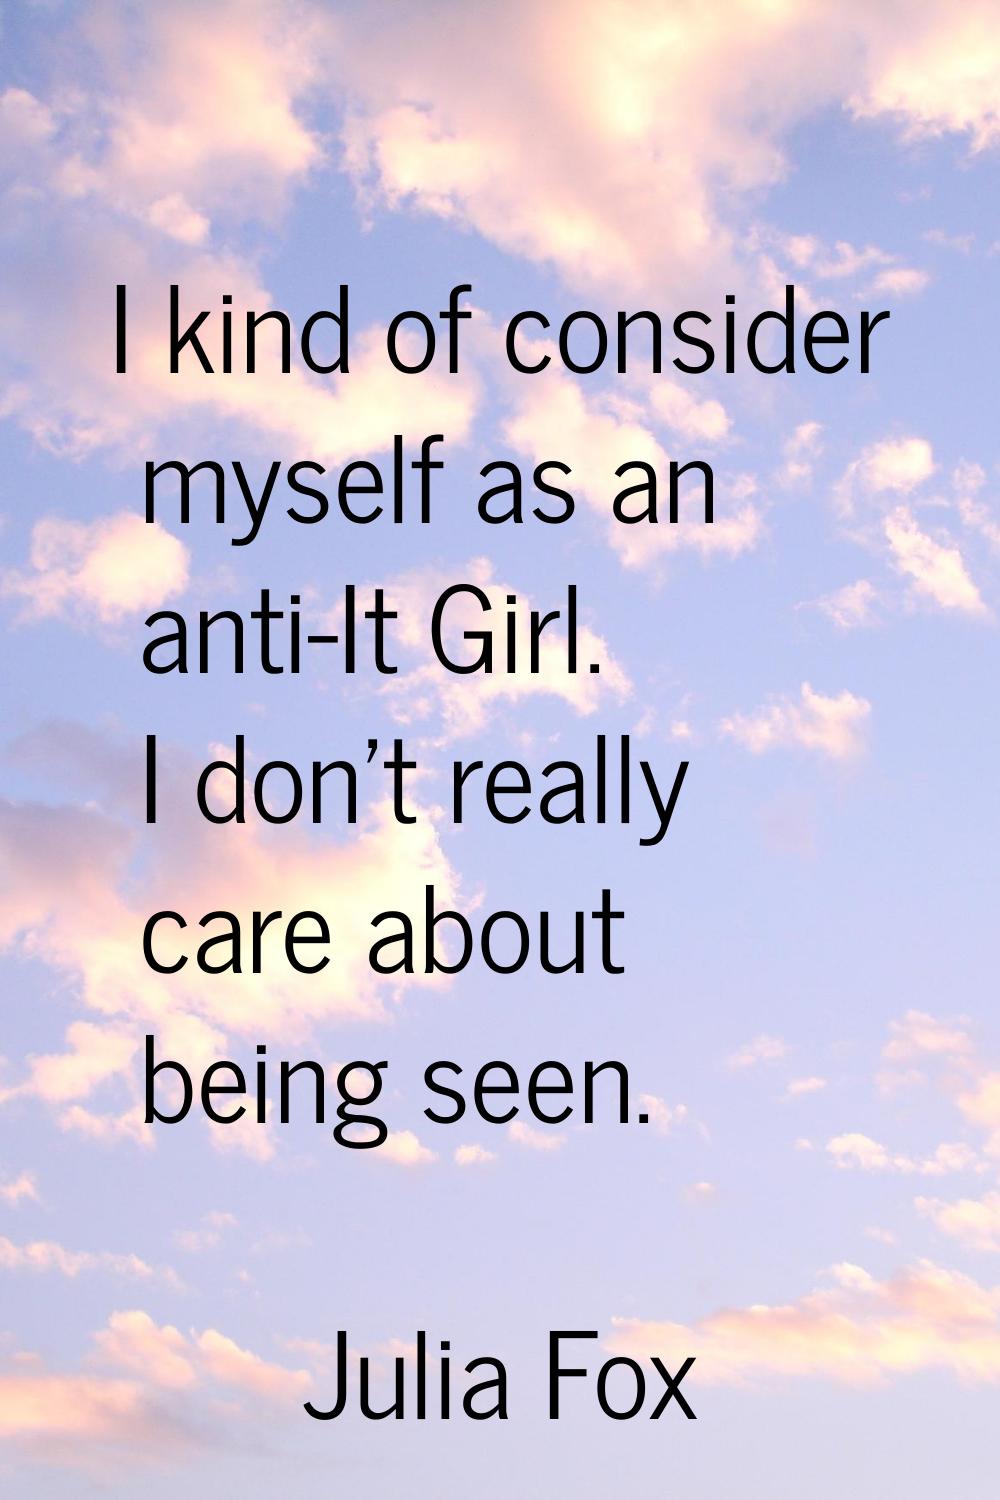 I kind of consider myself as an anti-It Girl. I don't really care about being seen.